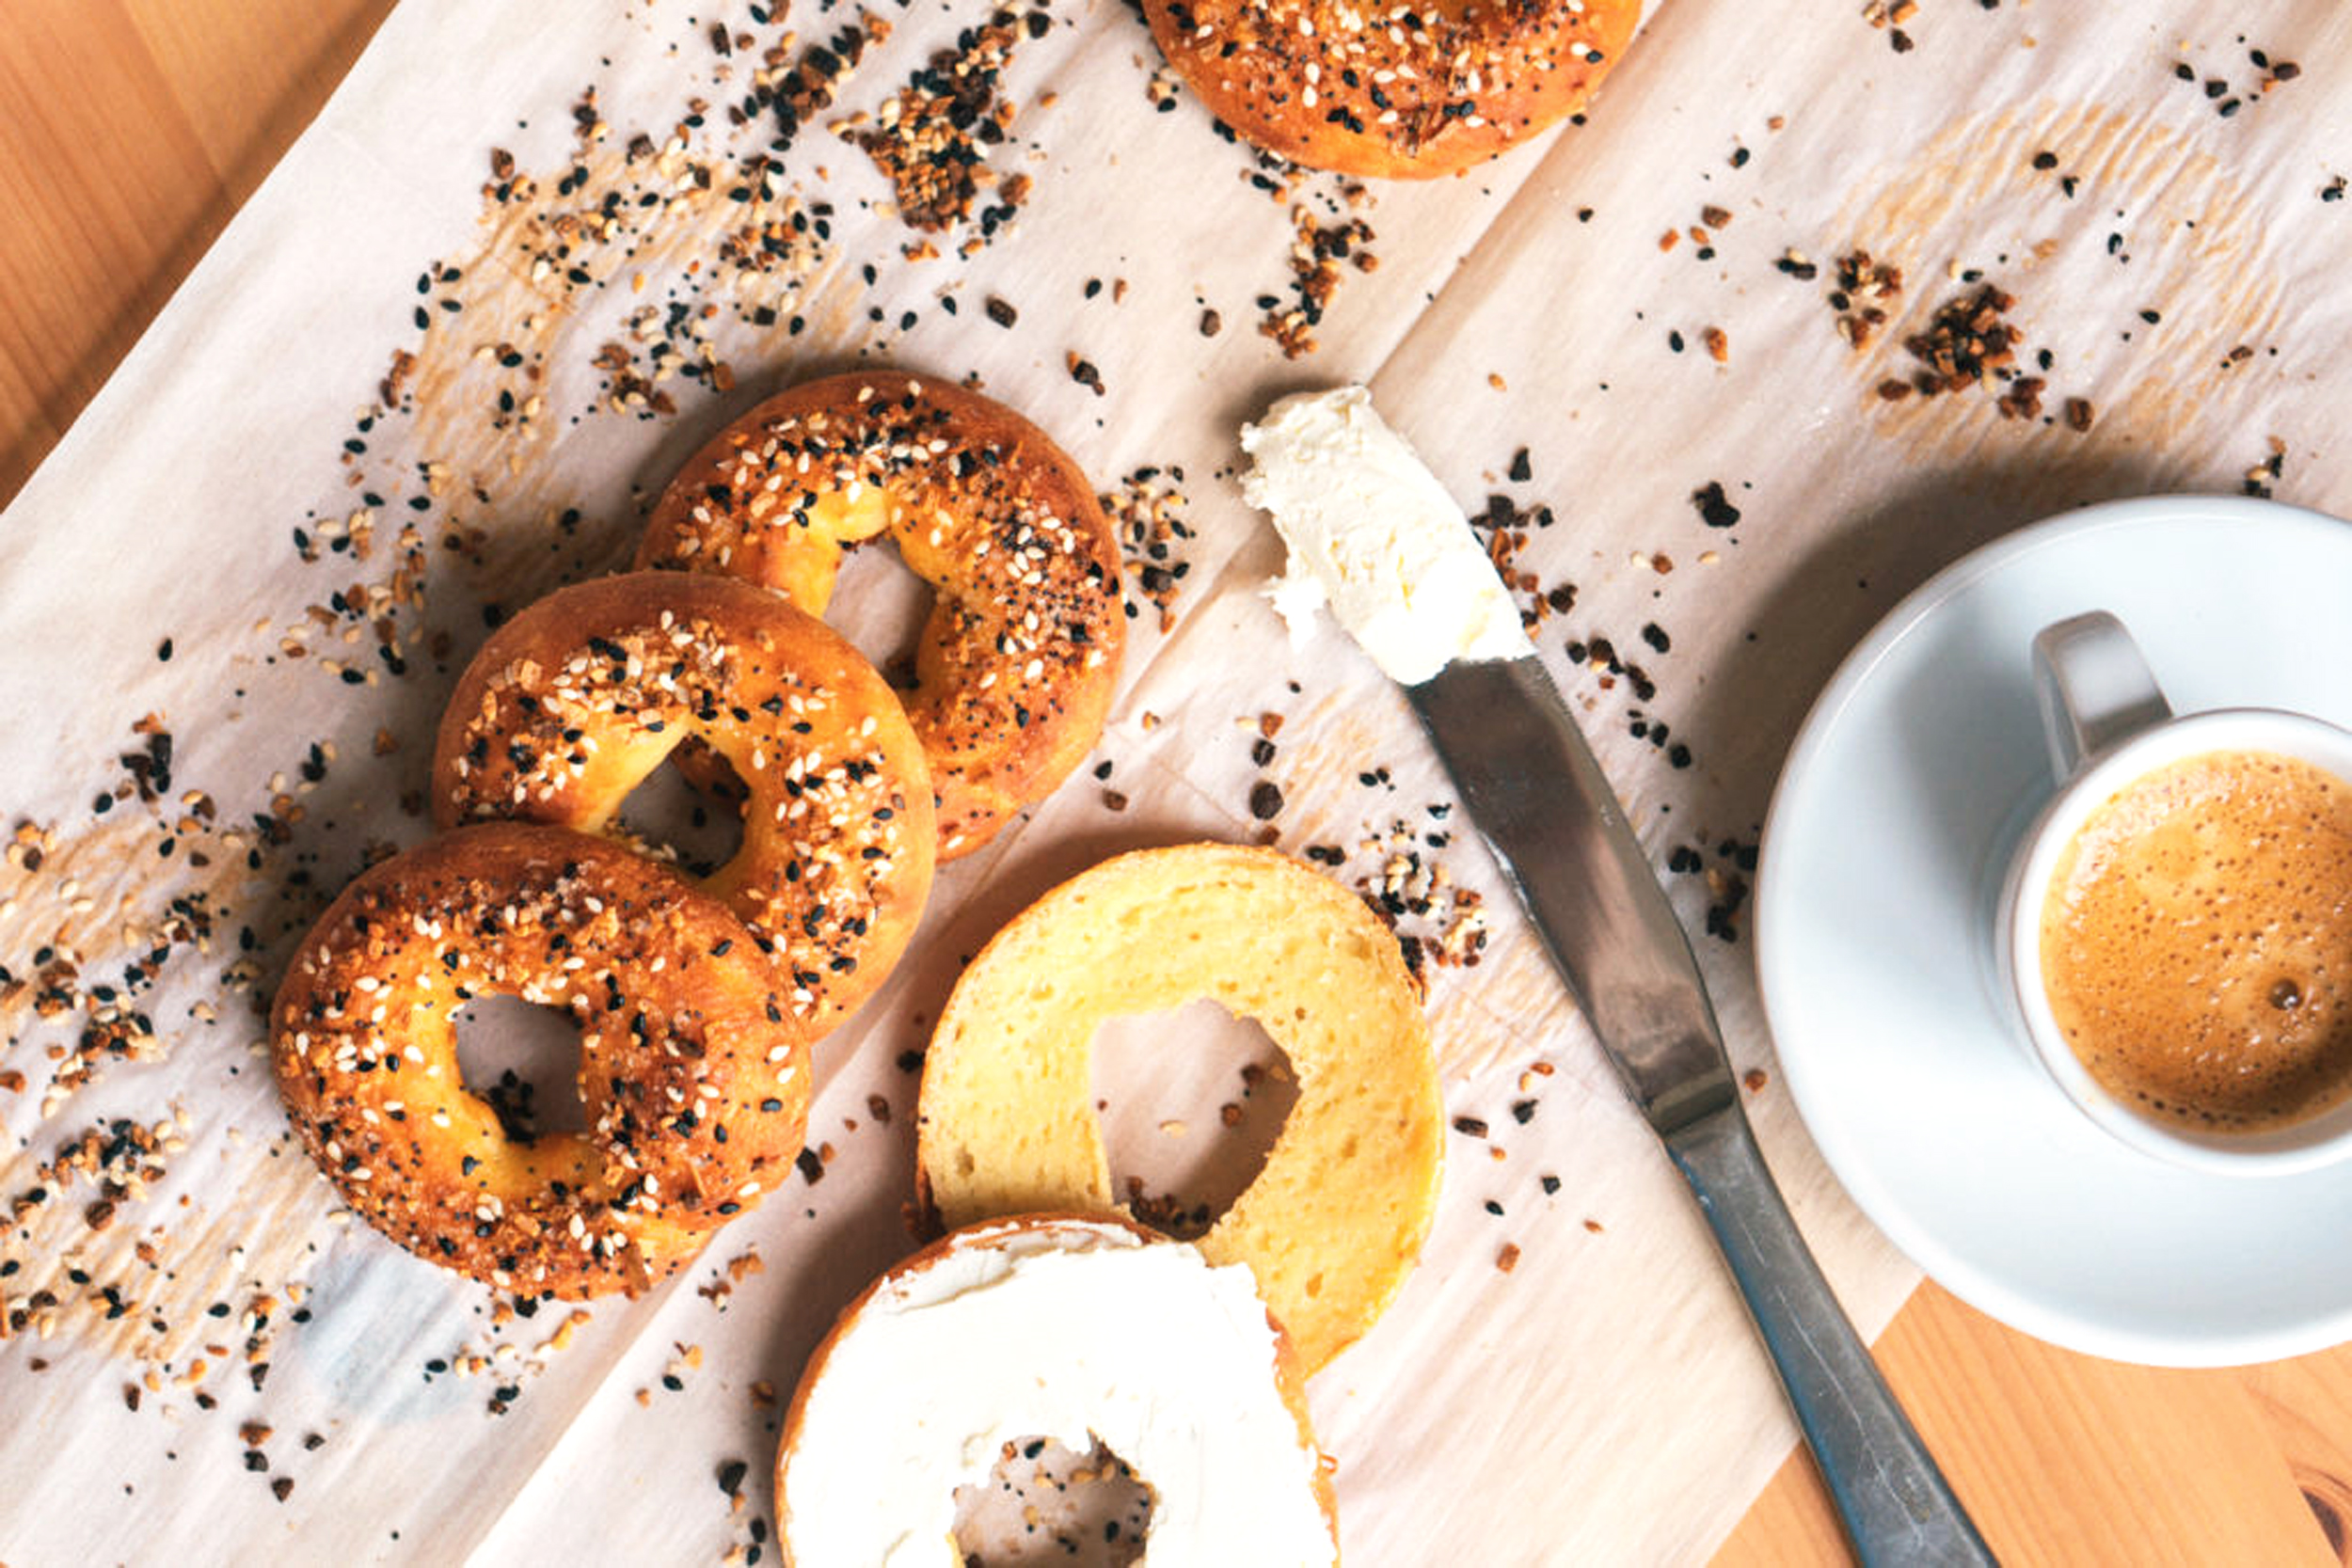 PHOTO: Keto fathead everything bagels by Ketoconnect.com are pictured.
